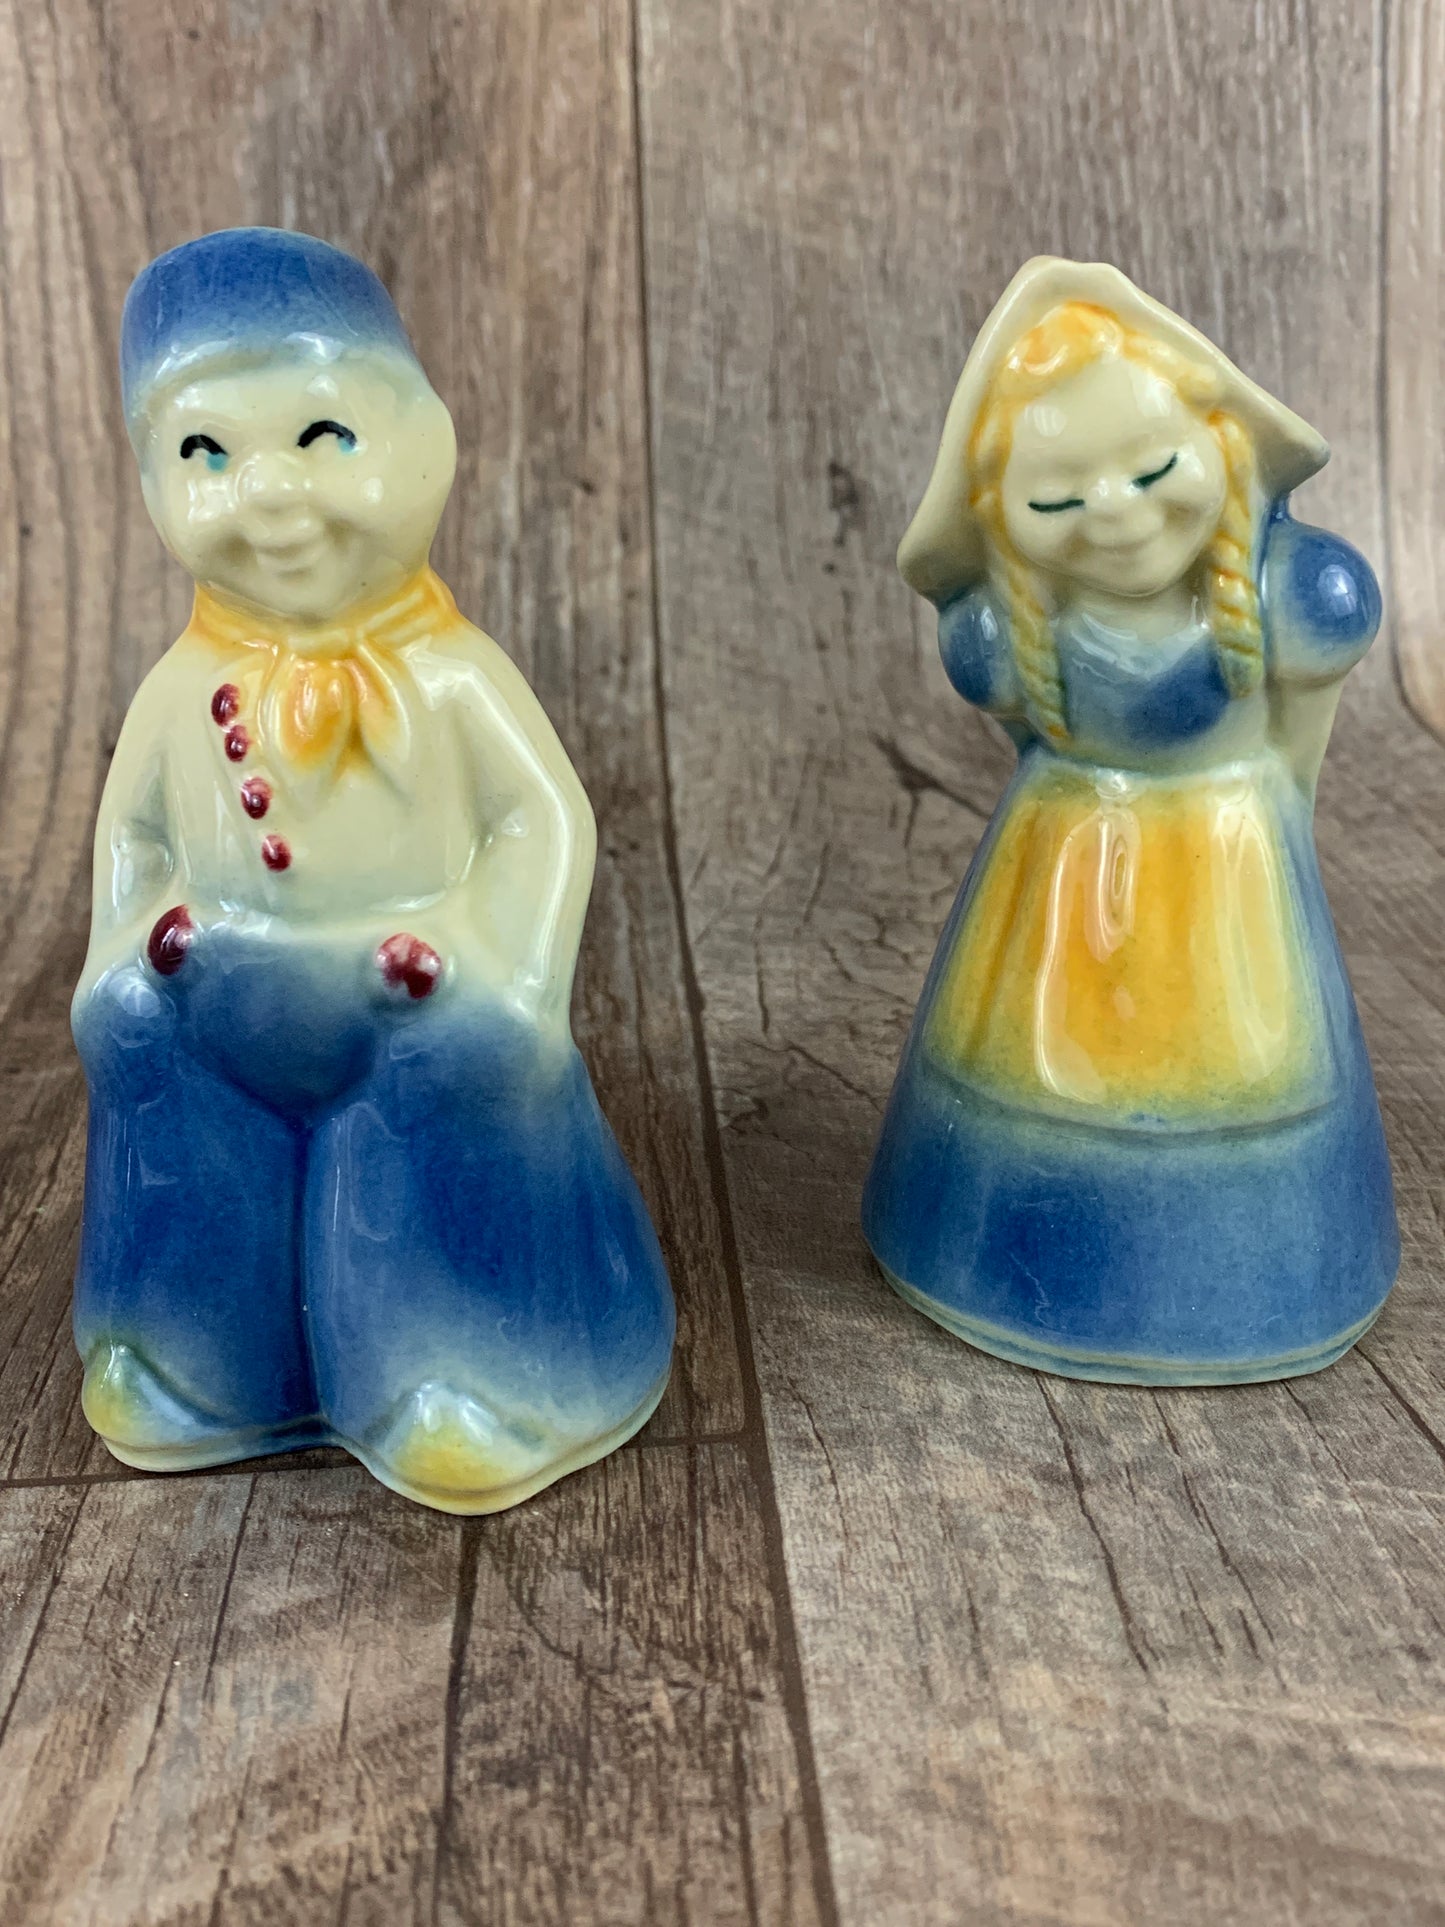 USA Potteries Vintage Ceramic Dutch Boy and Girl Salt and Pepper Shakers